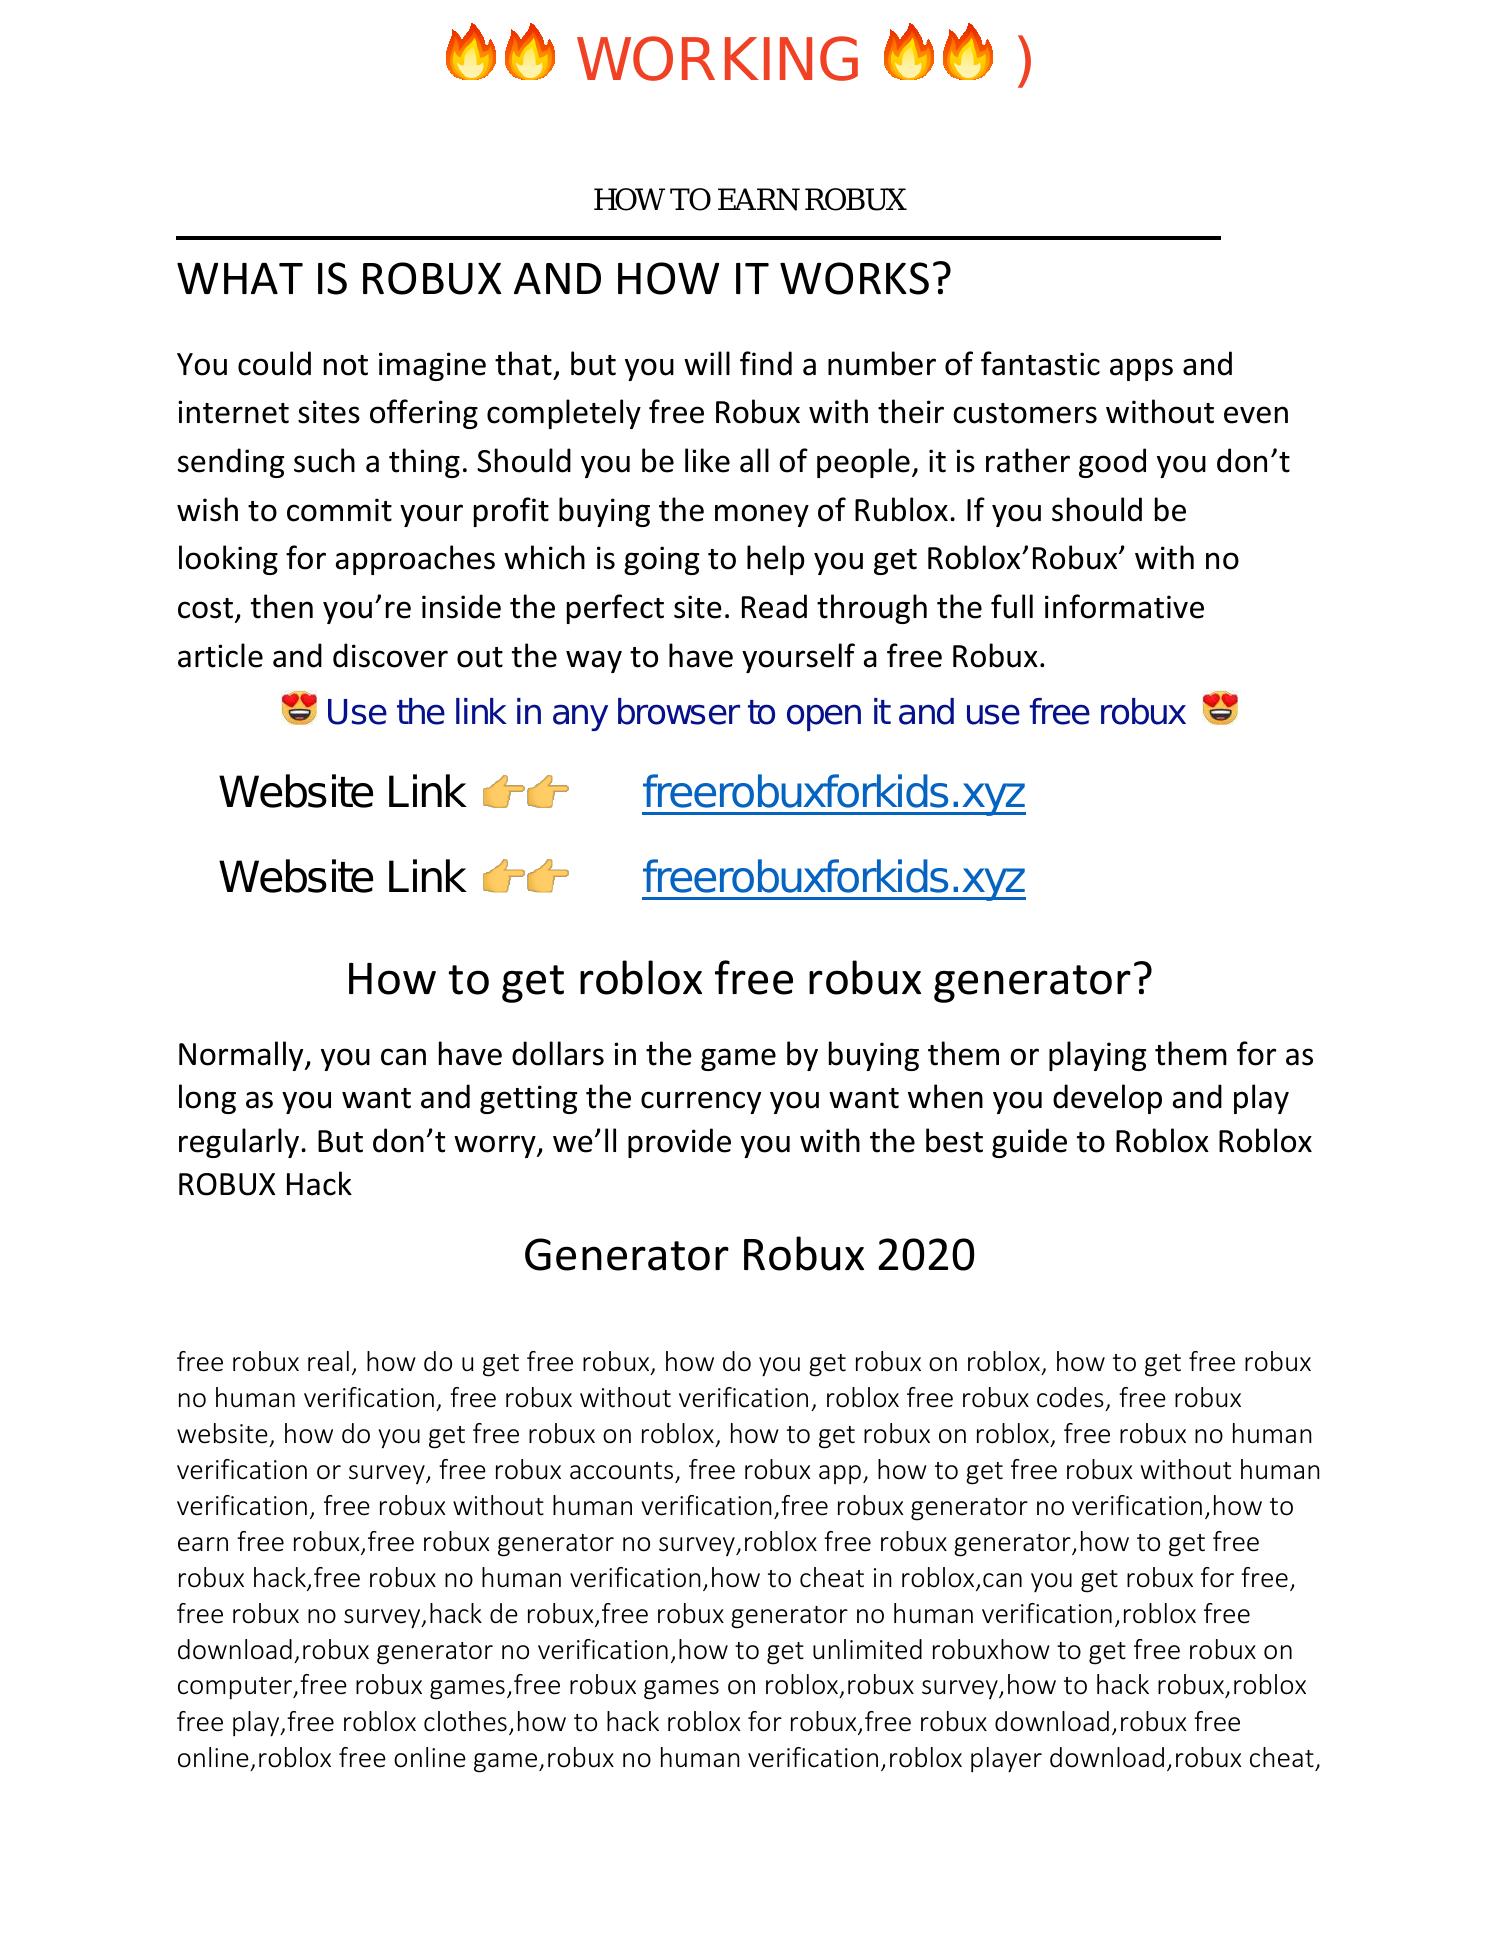 Roblox Robux Hack Generator Doc Docdroid - robux genorator link